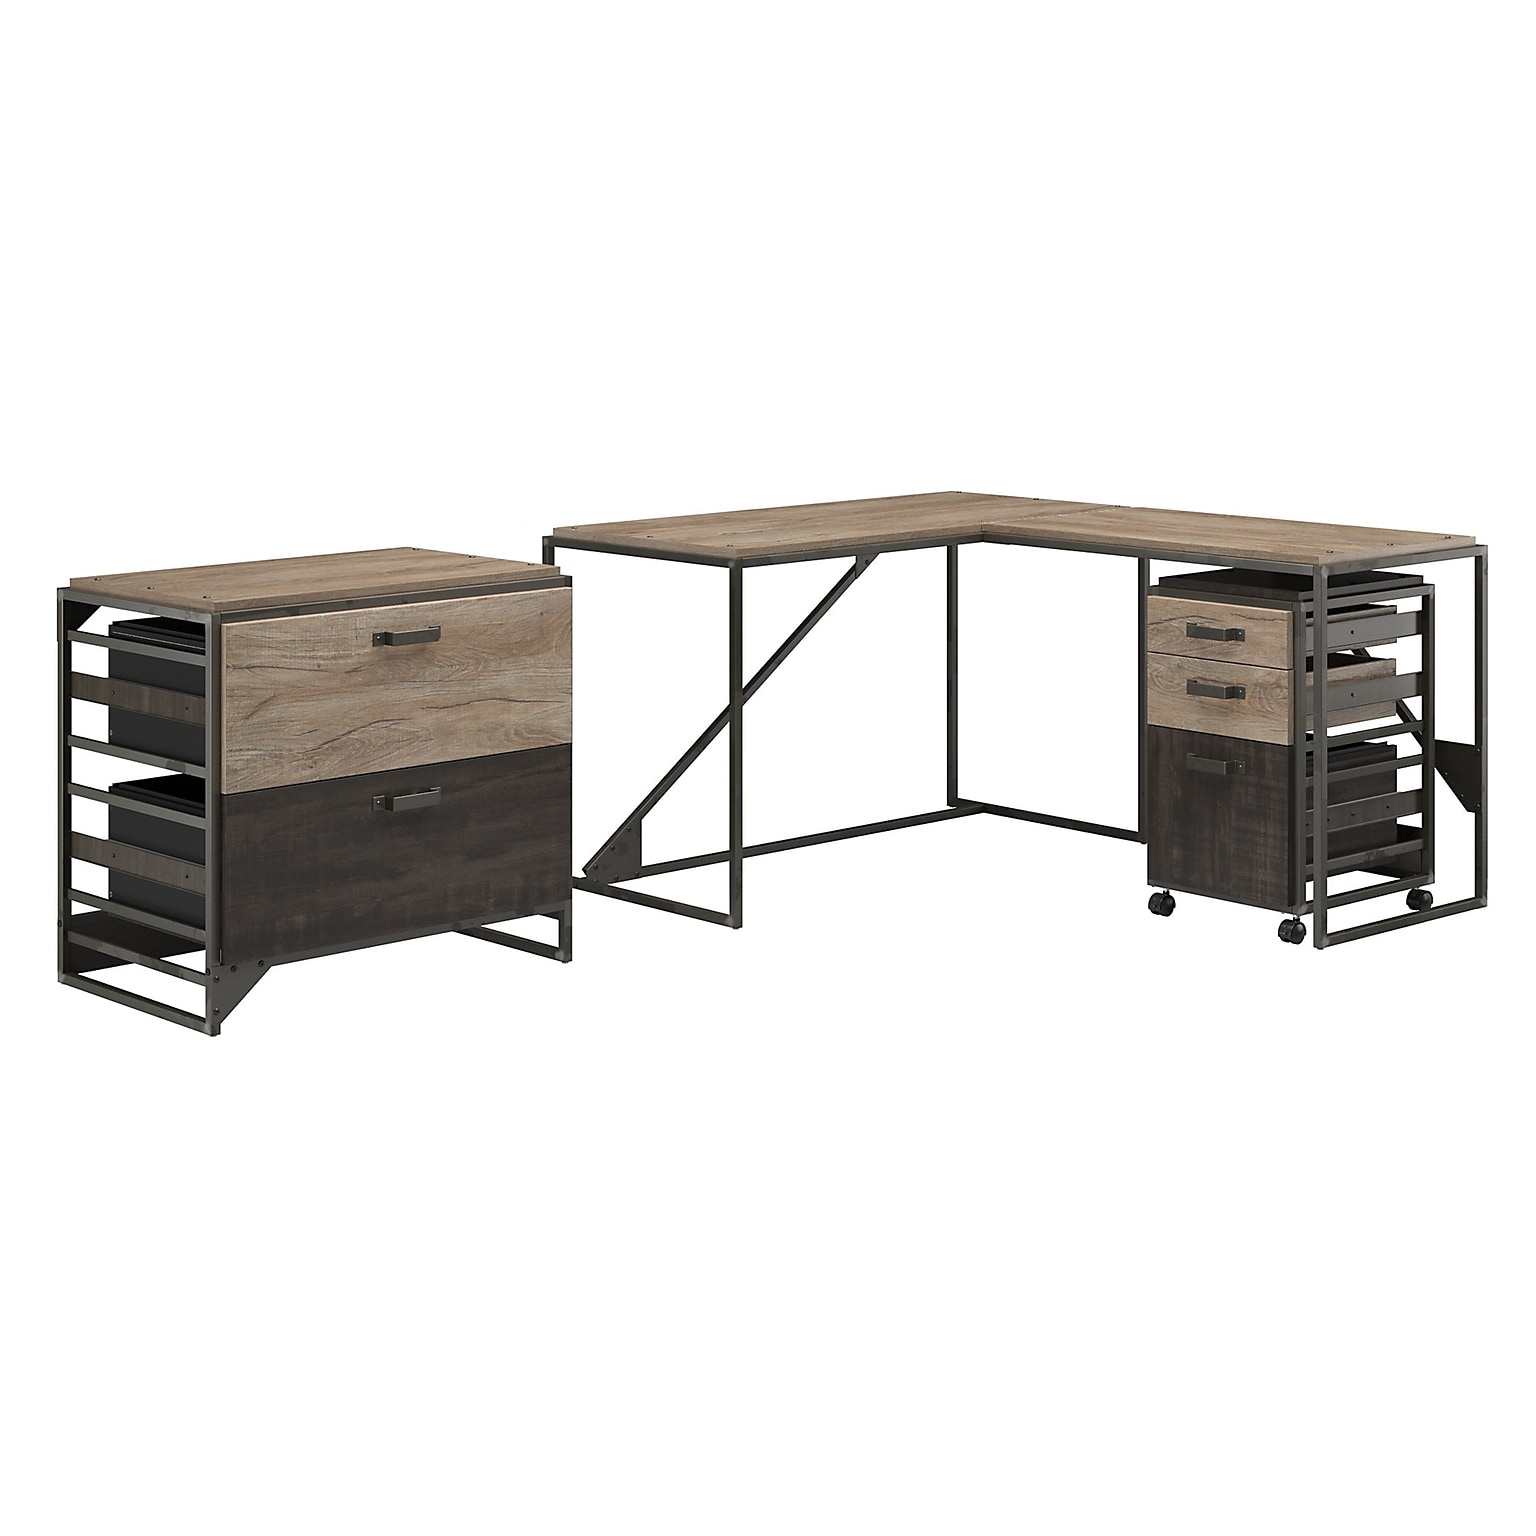 Bush Furniture Refinery 50W L Shaped Industrial Desk with File Cabinets, Rustic Gray/Charred Wood (RFY009RG)